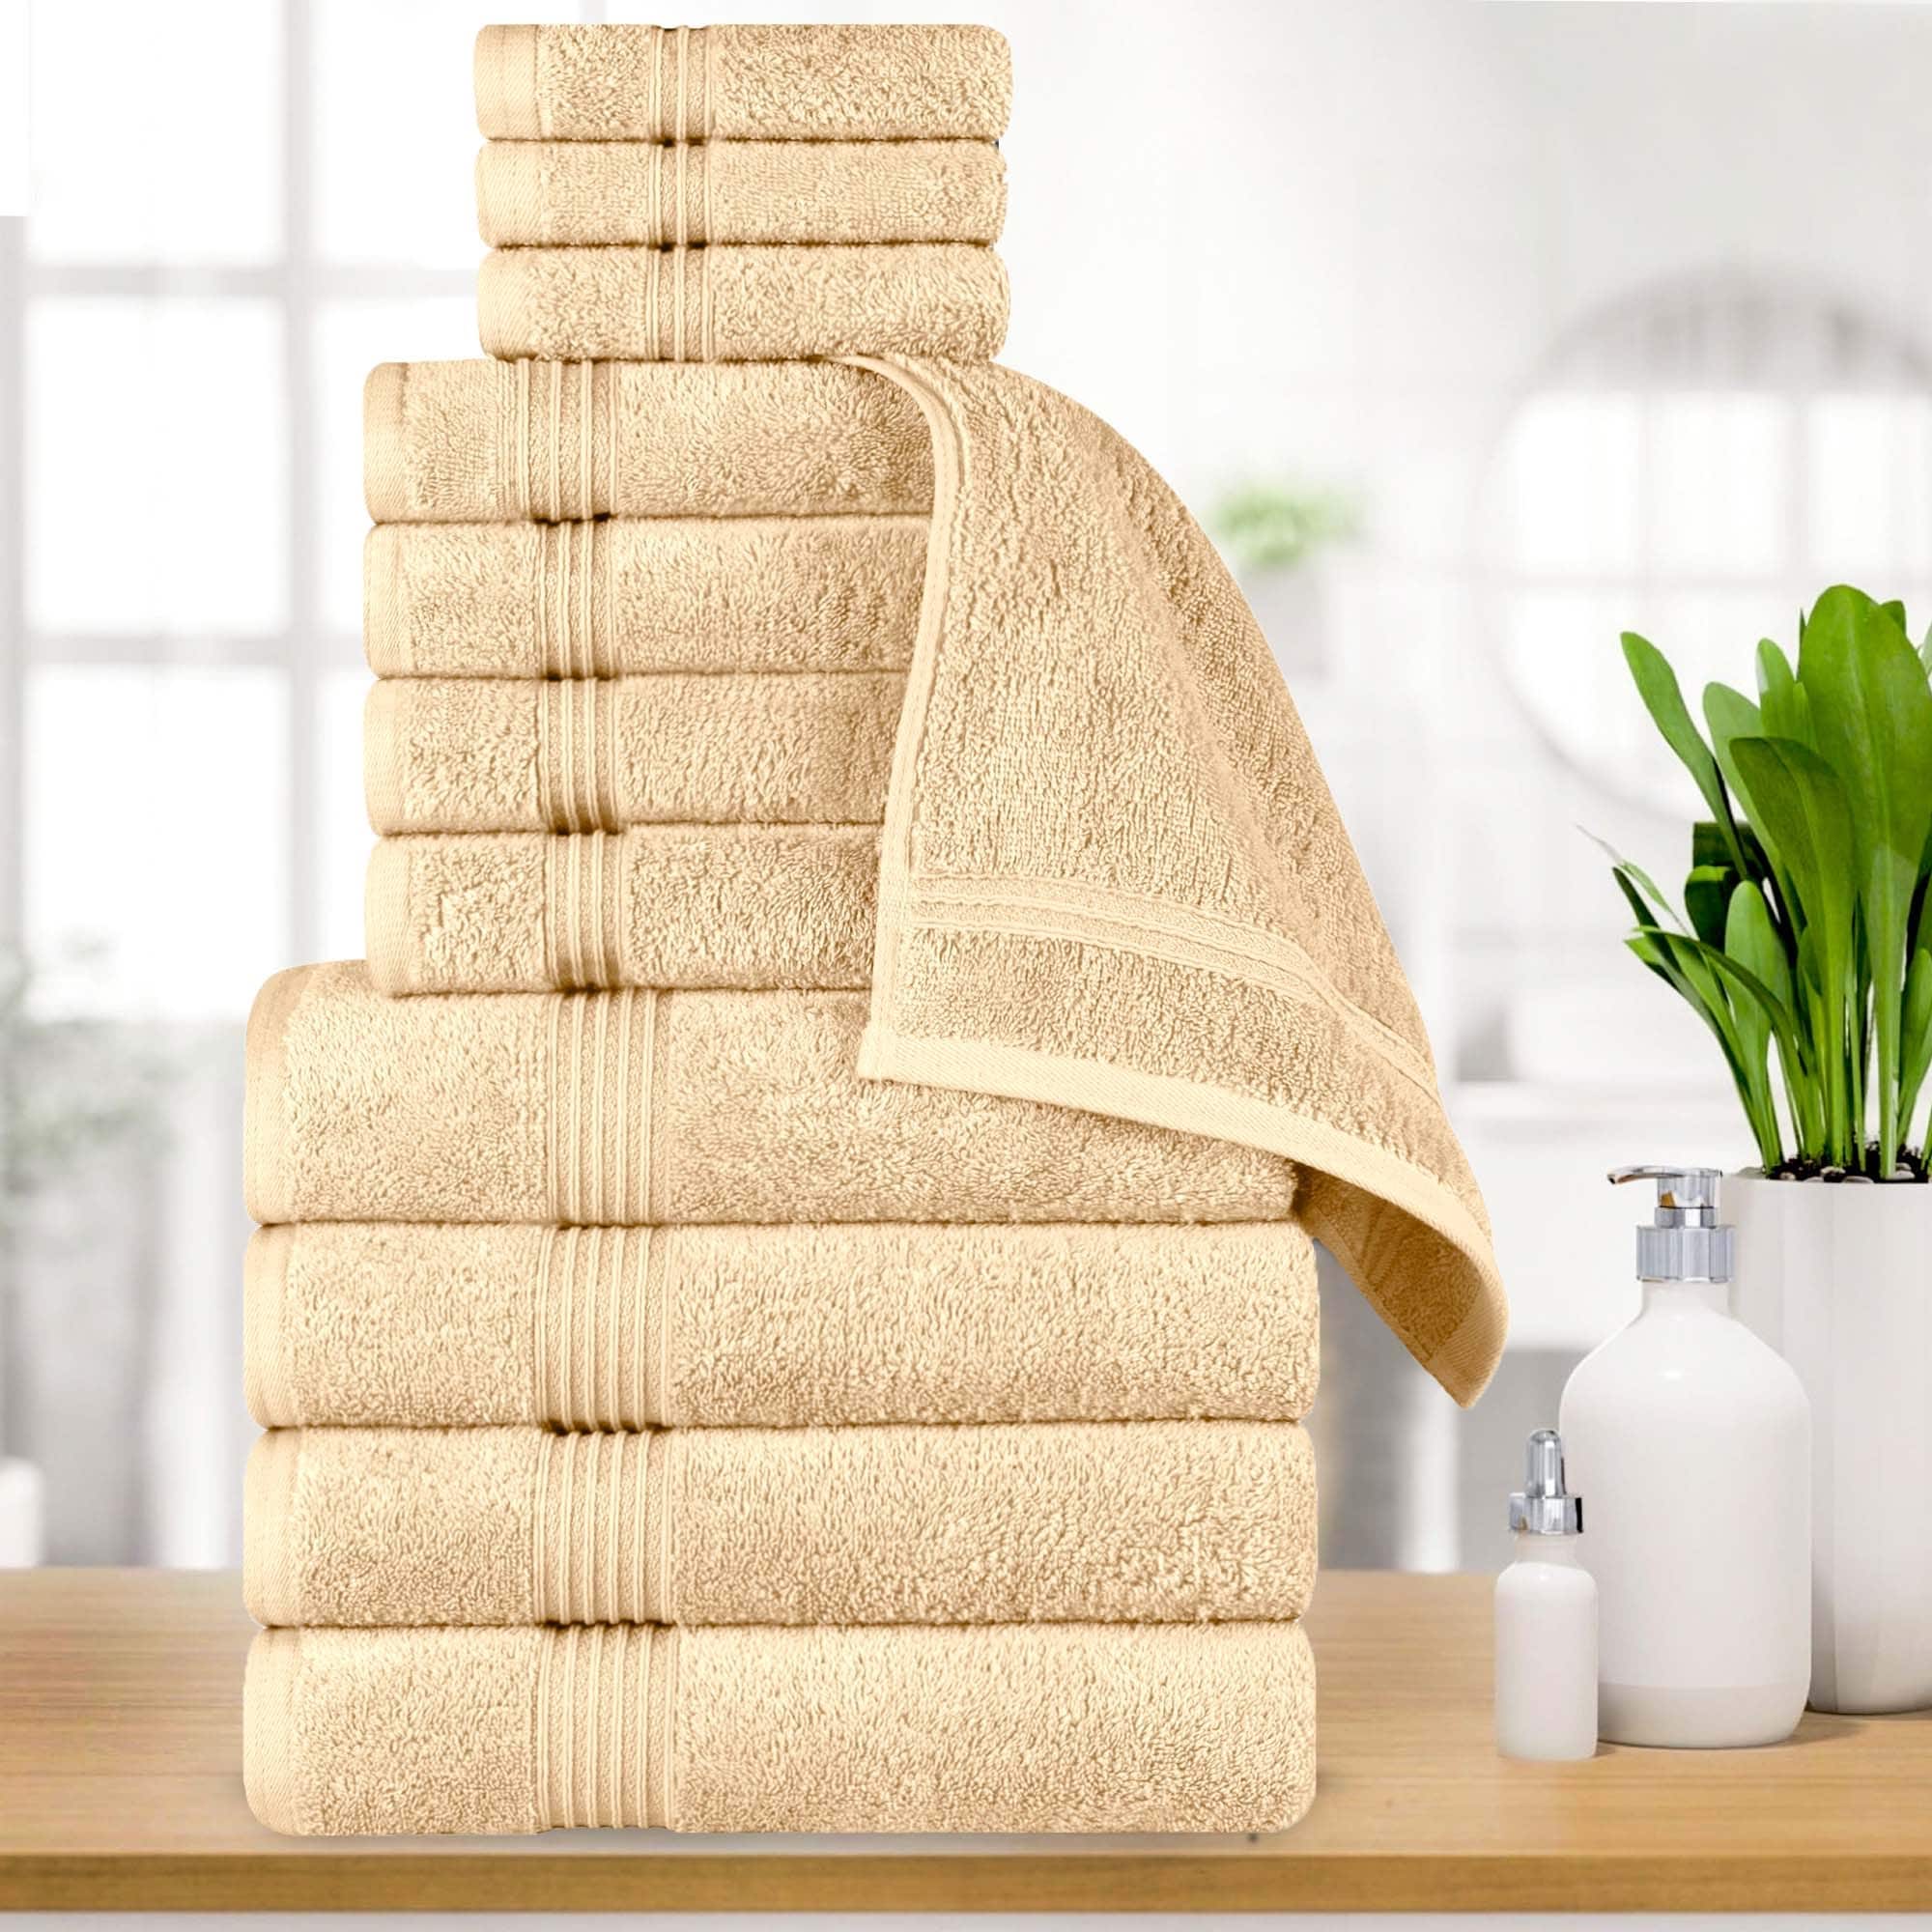 https://ak1.ostkcdn.com/images/products/is/images/direct/411658387777380646baf689dfeeb4893f167838/Superior-Heritage-Egyptian-Cotton-Heavyweight-12-Piece-Bathroom-Towel-Set.jpg